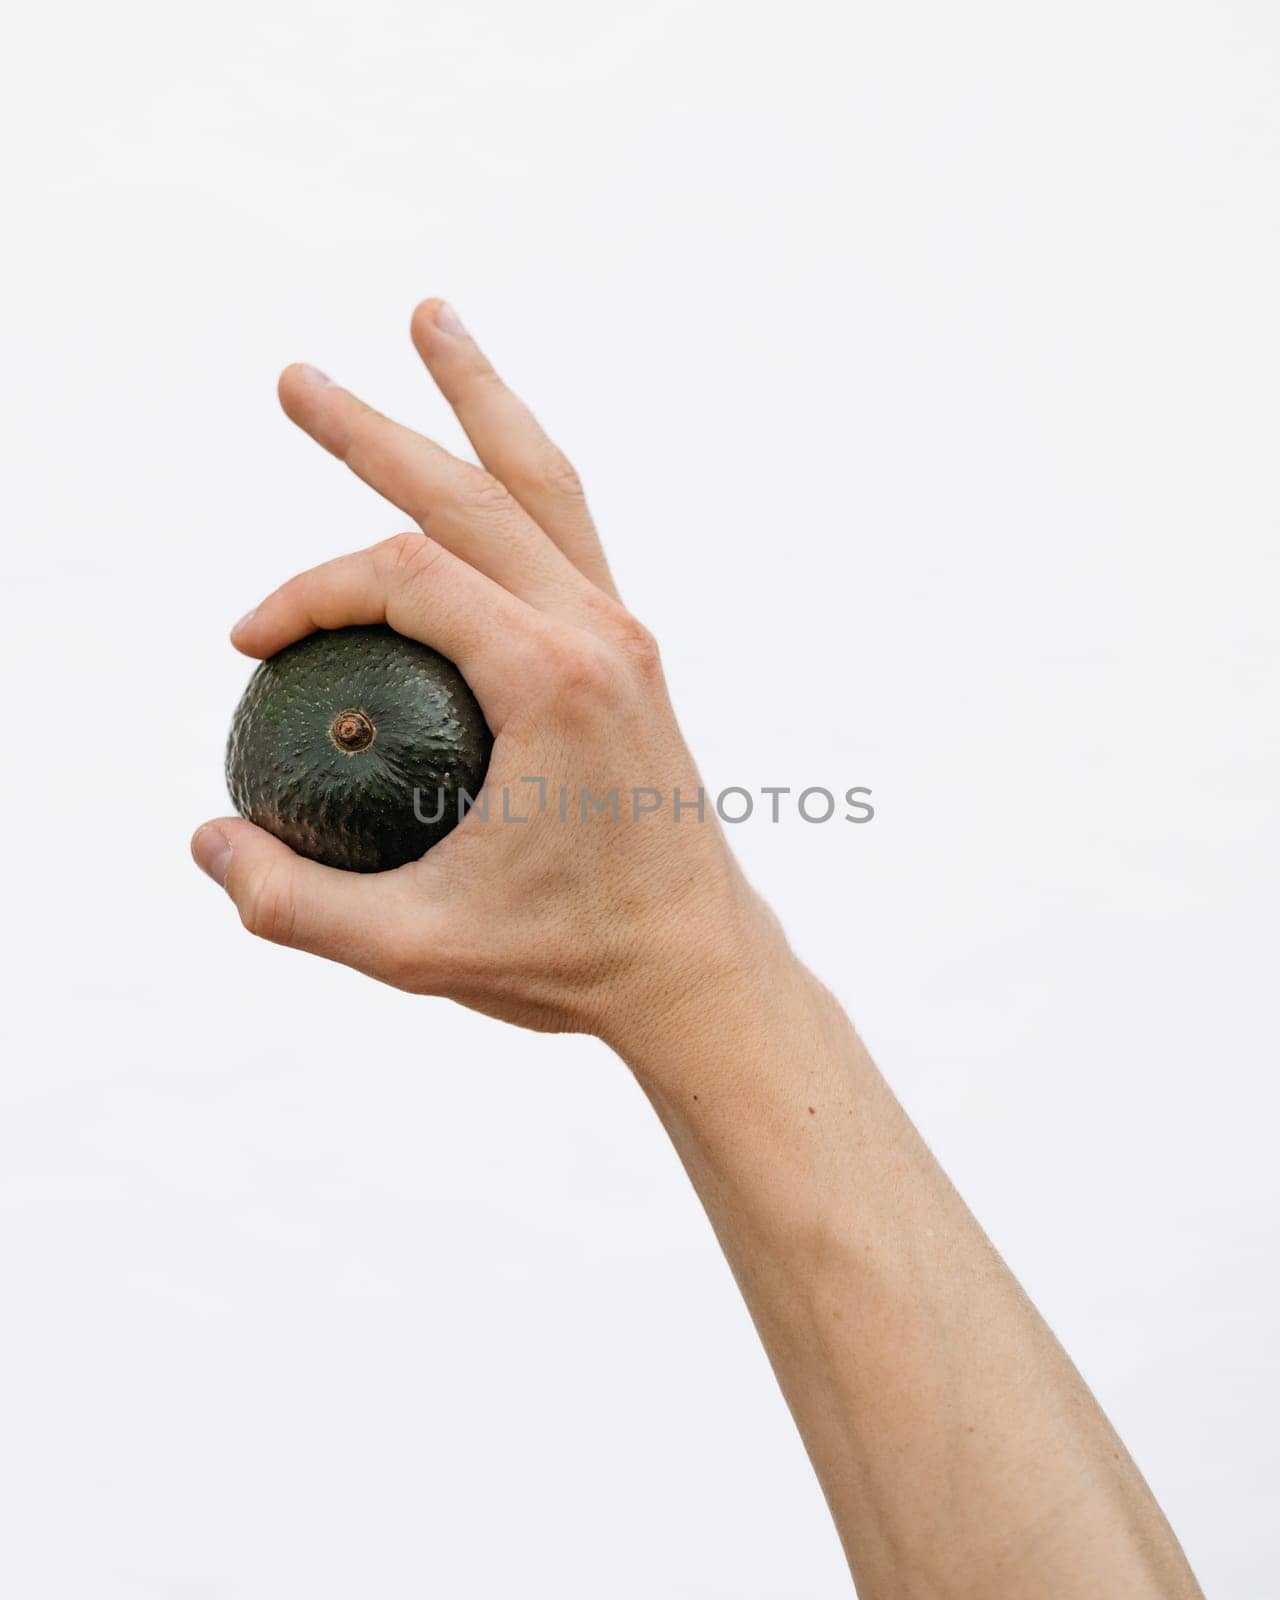 A human hand holding a whole avocado, with a white backdrop emphasizing simplicity and health